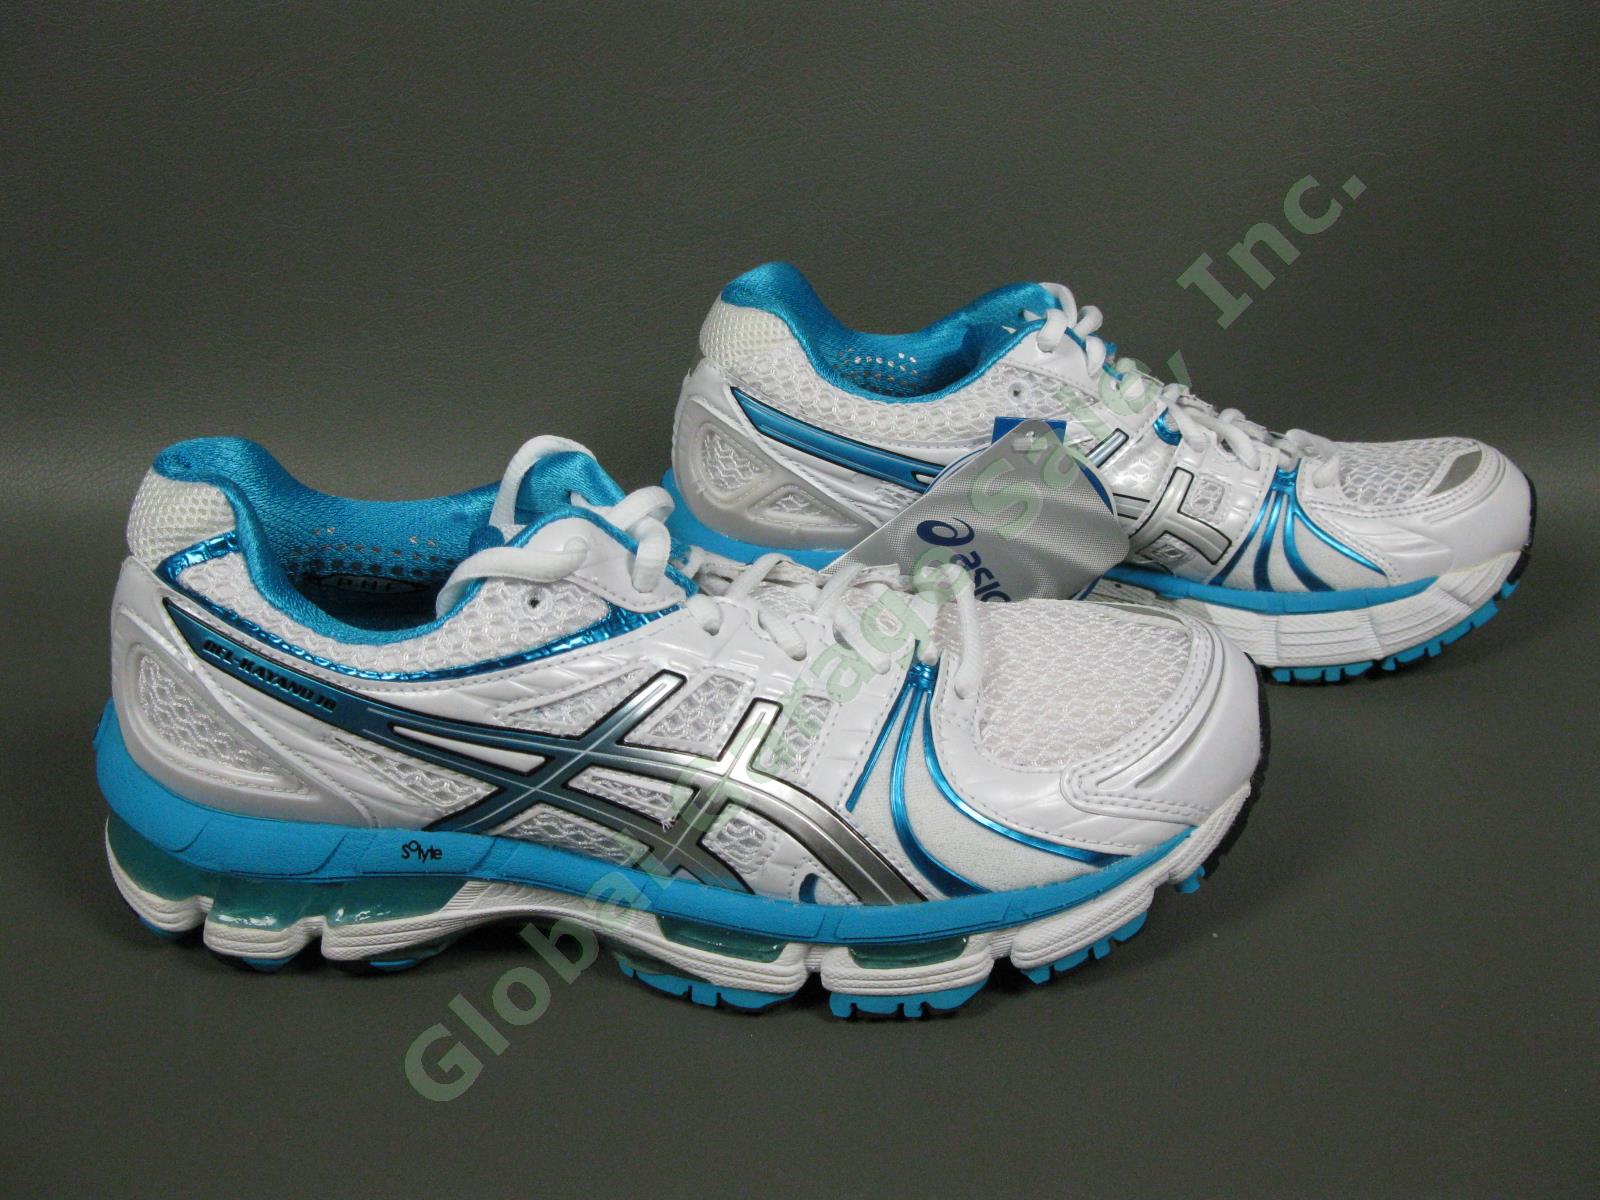 NEW Asics Gel Kayano-18 Womens White/Blue Running Sneakers Pair Size US-8 Shoes 3